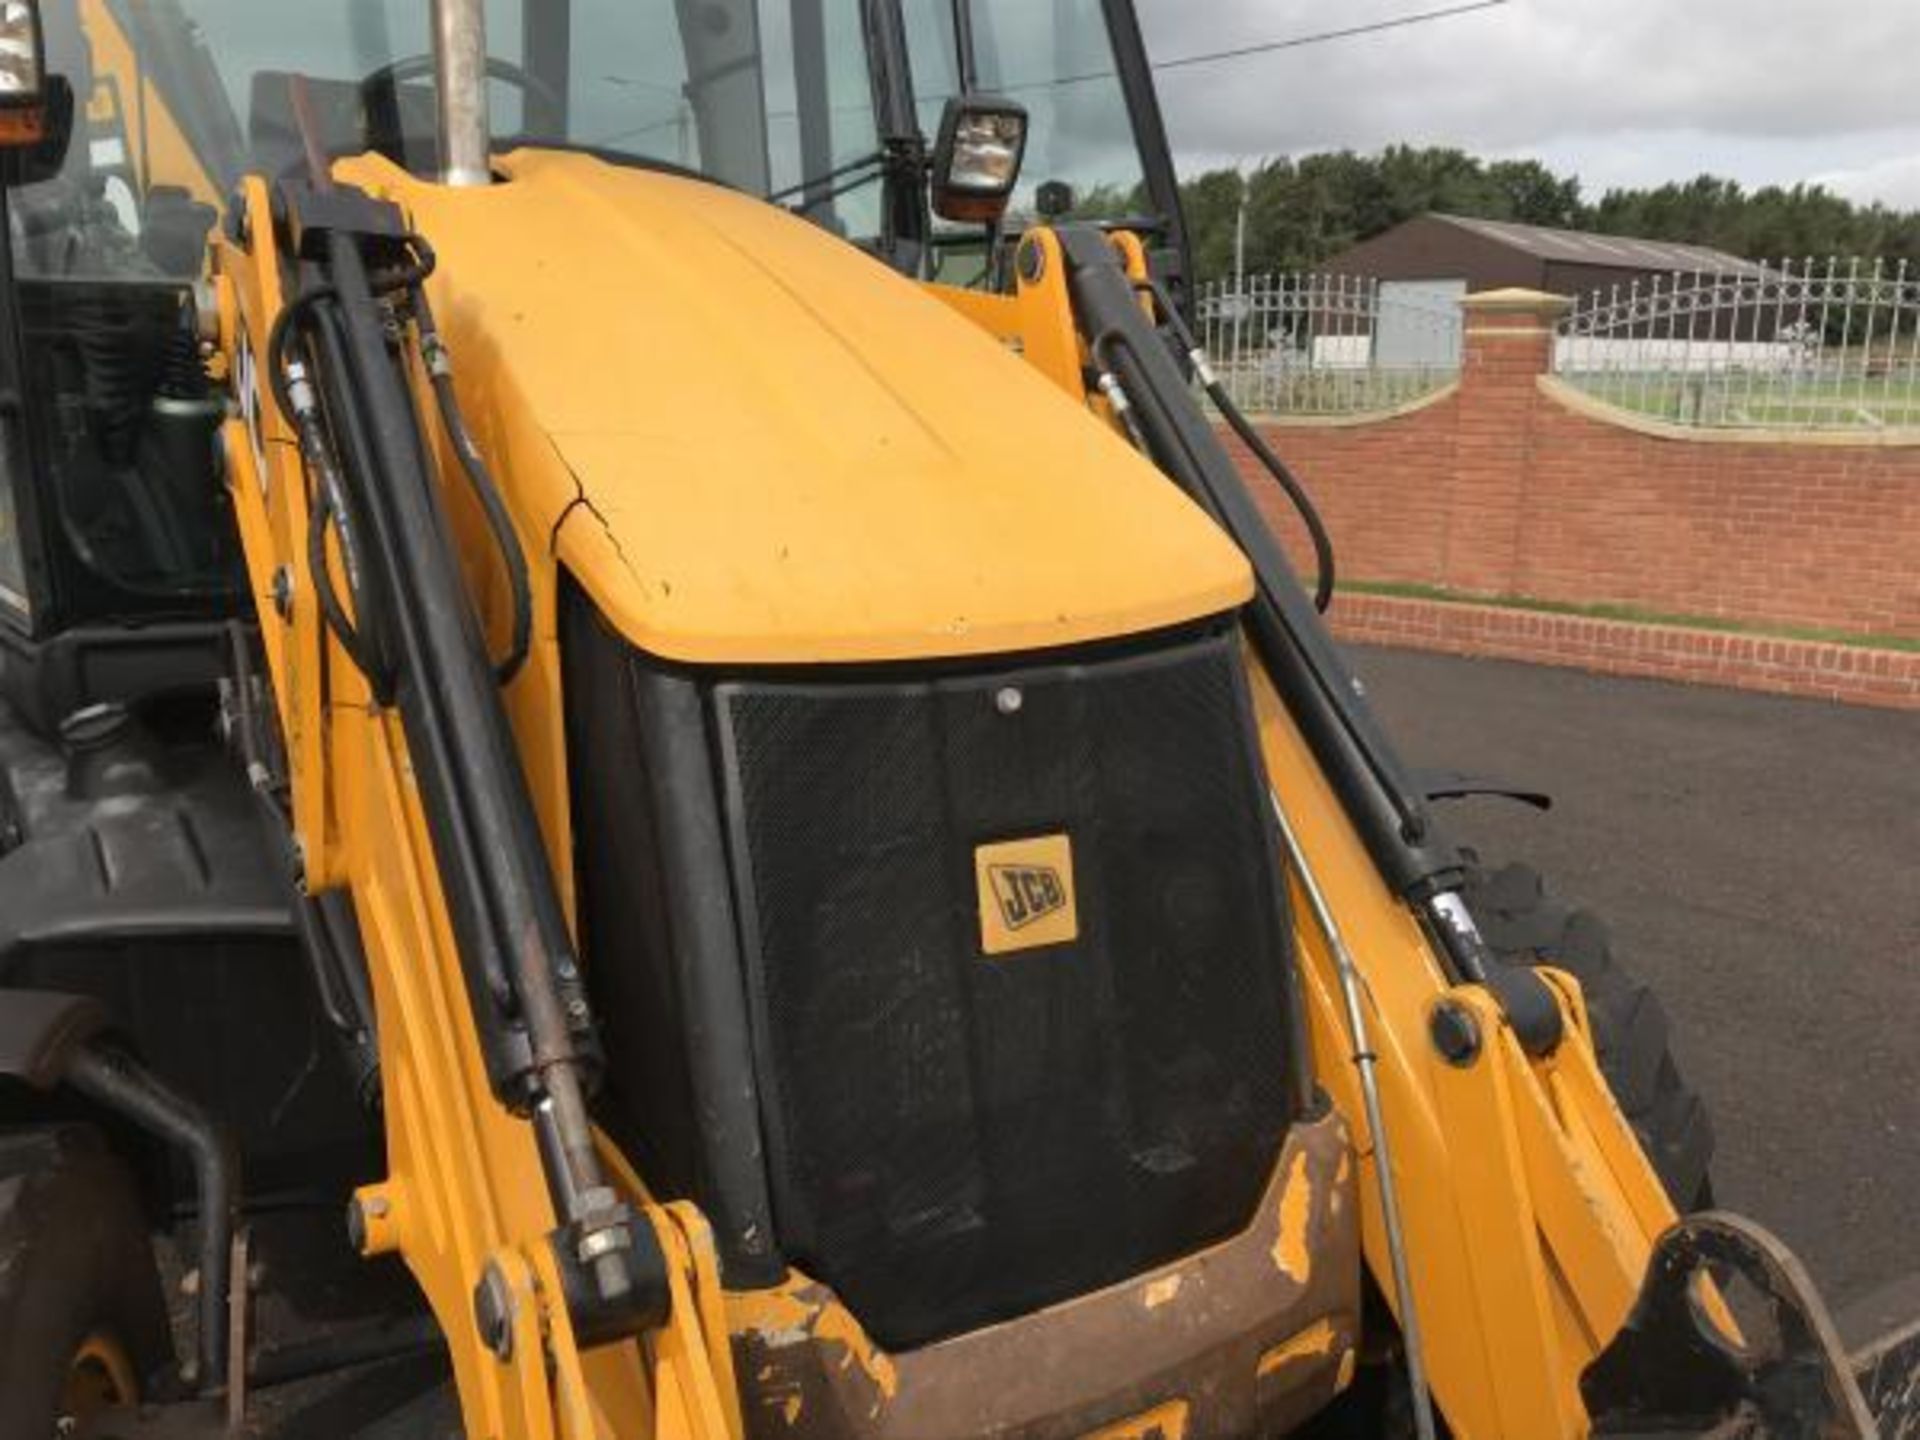 2011 ON 61 PLATE JCB SITEMASTER ECO WITH TORQUELOCK QUICK HITCH *PLUS VAT* - Image 10 of 14